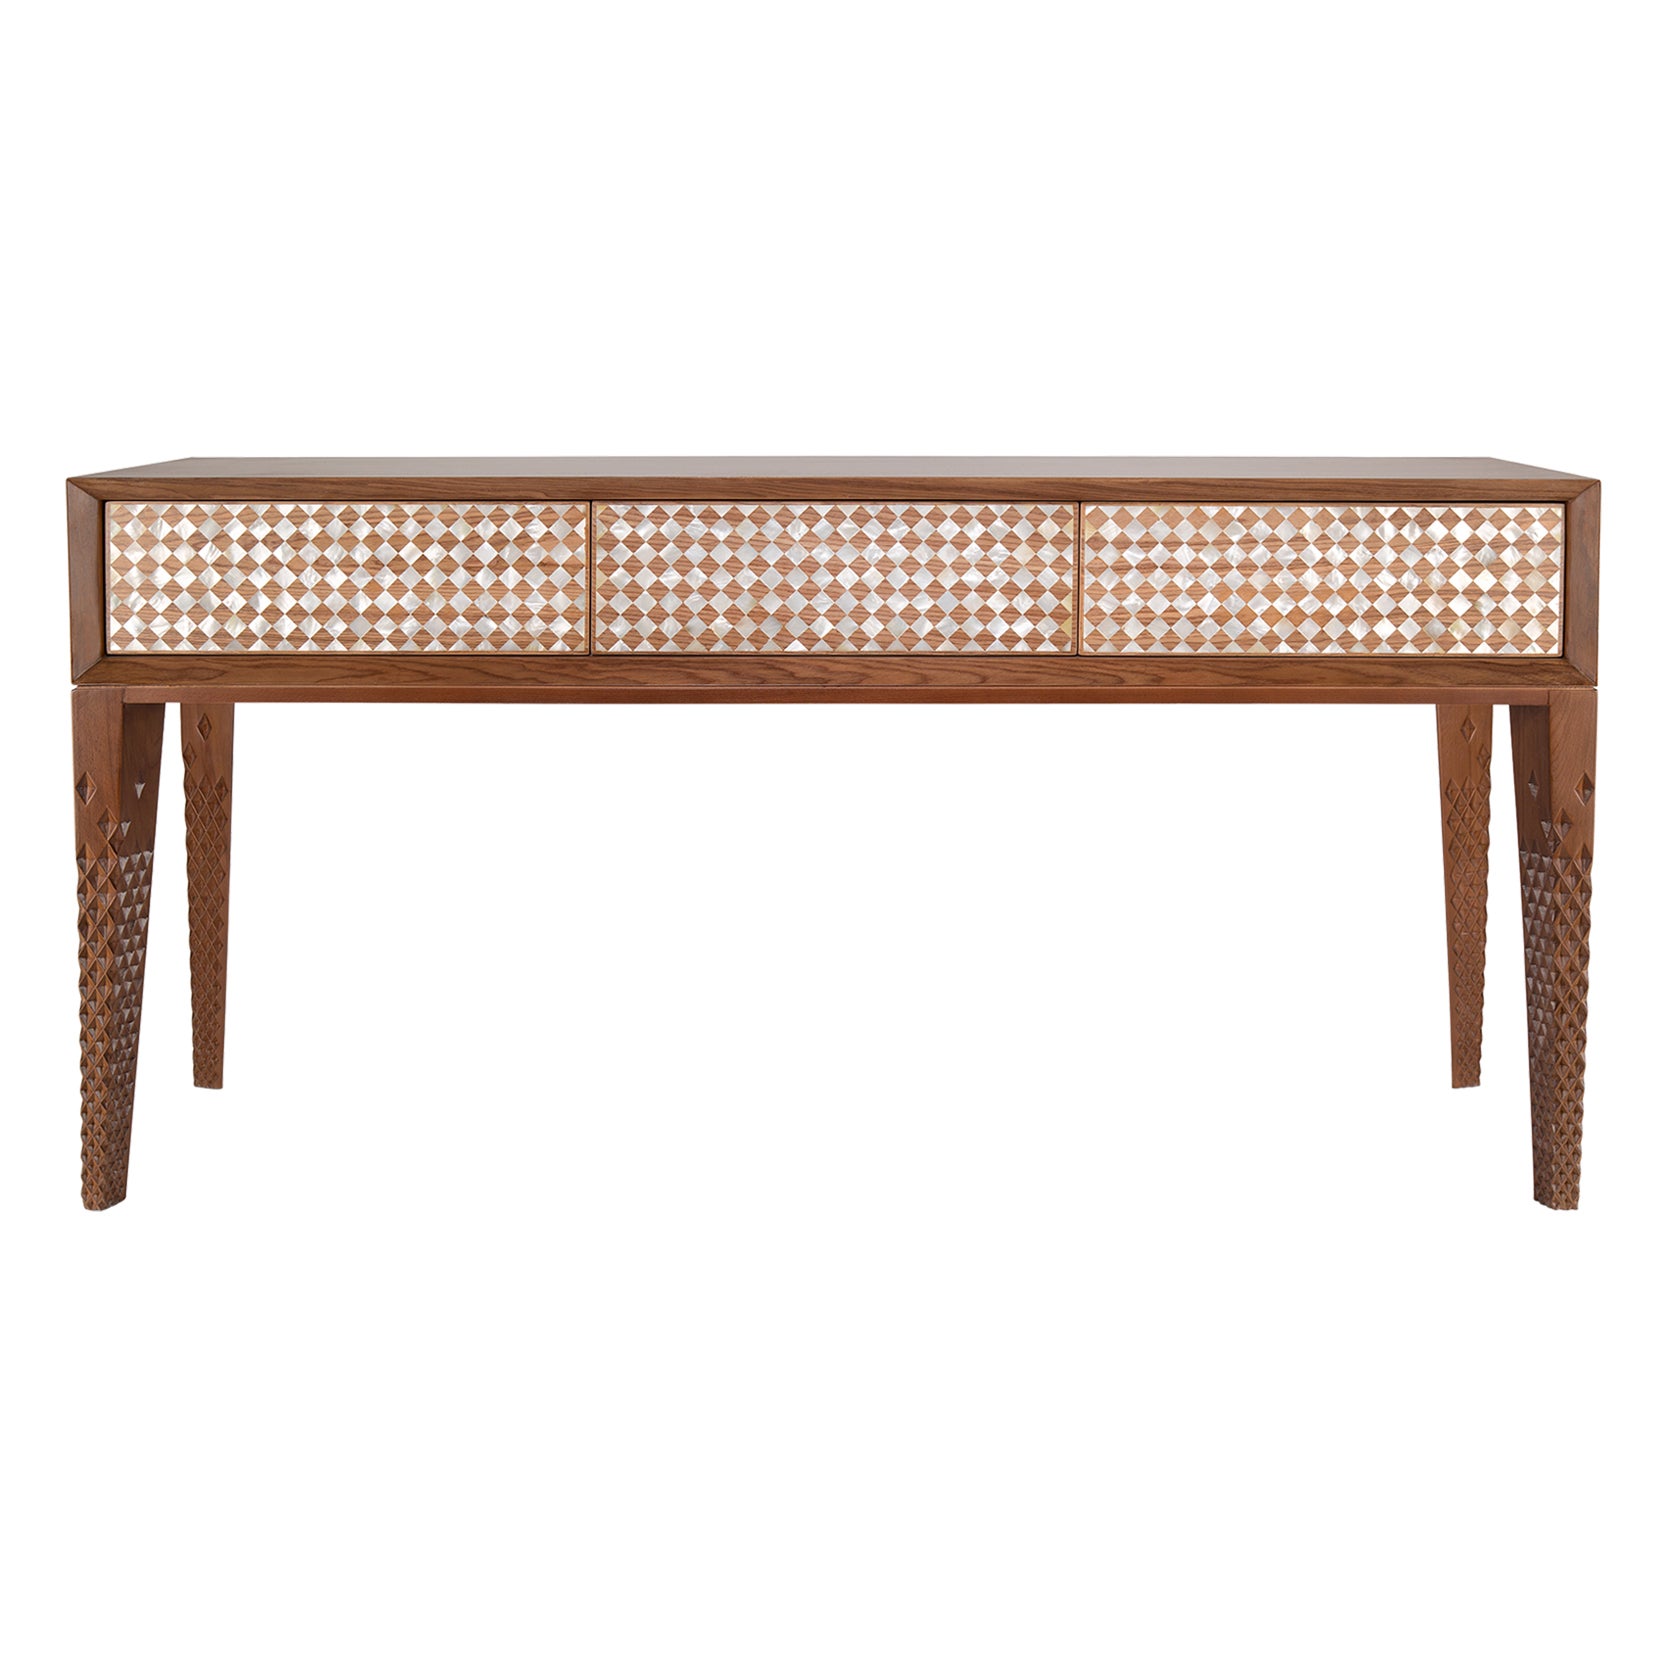 Hand-Carved Walnut Console with Intricate Mother-of-pearl Geometric Design